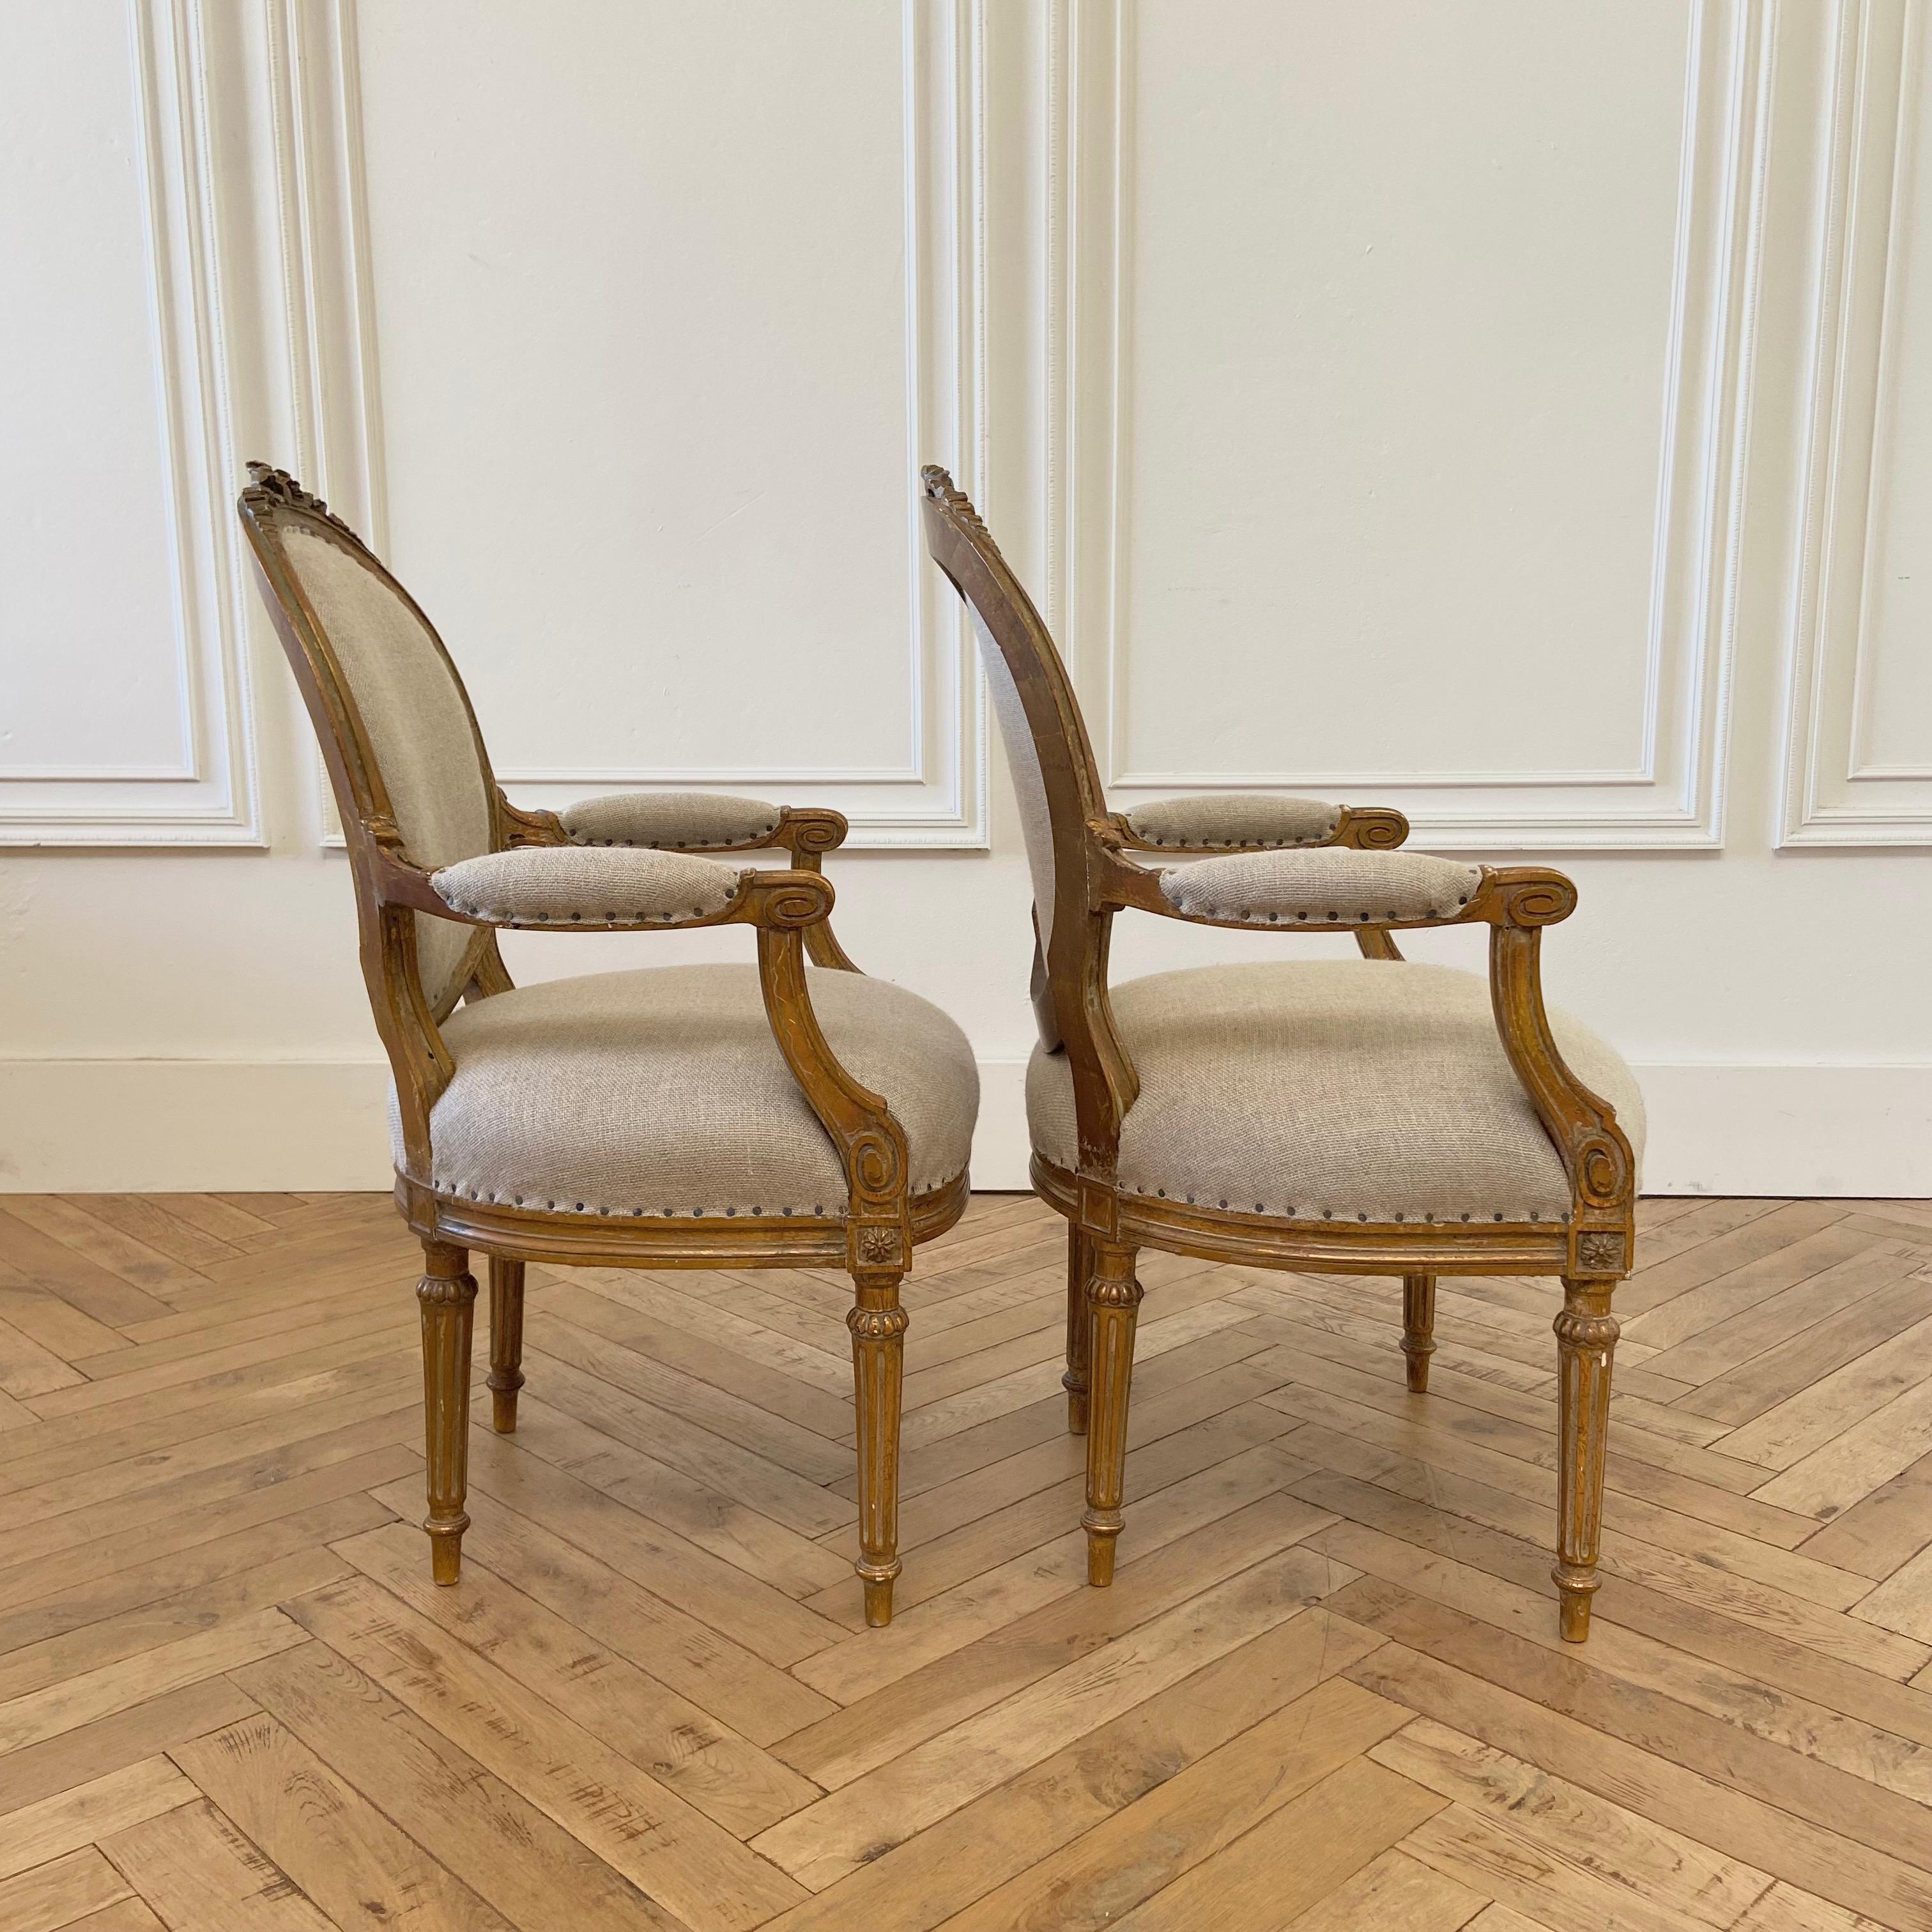 20th Century Antique Pair of Gilt Wood Open Arm Chairs Upholstered in Natural Linen For Sale